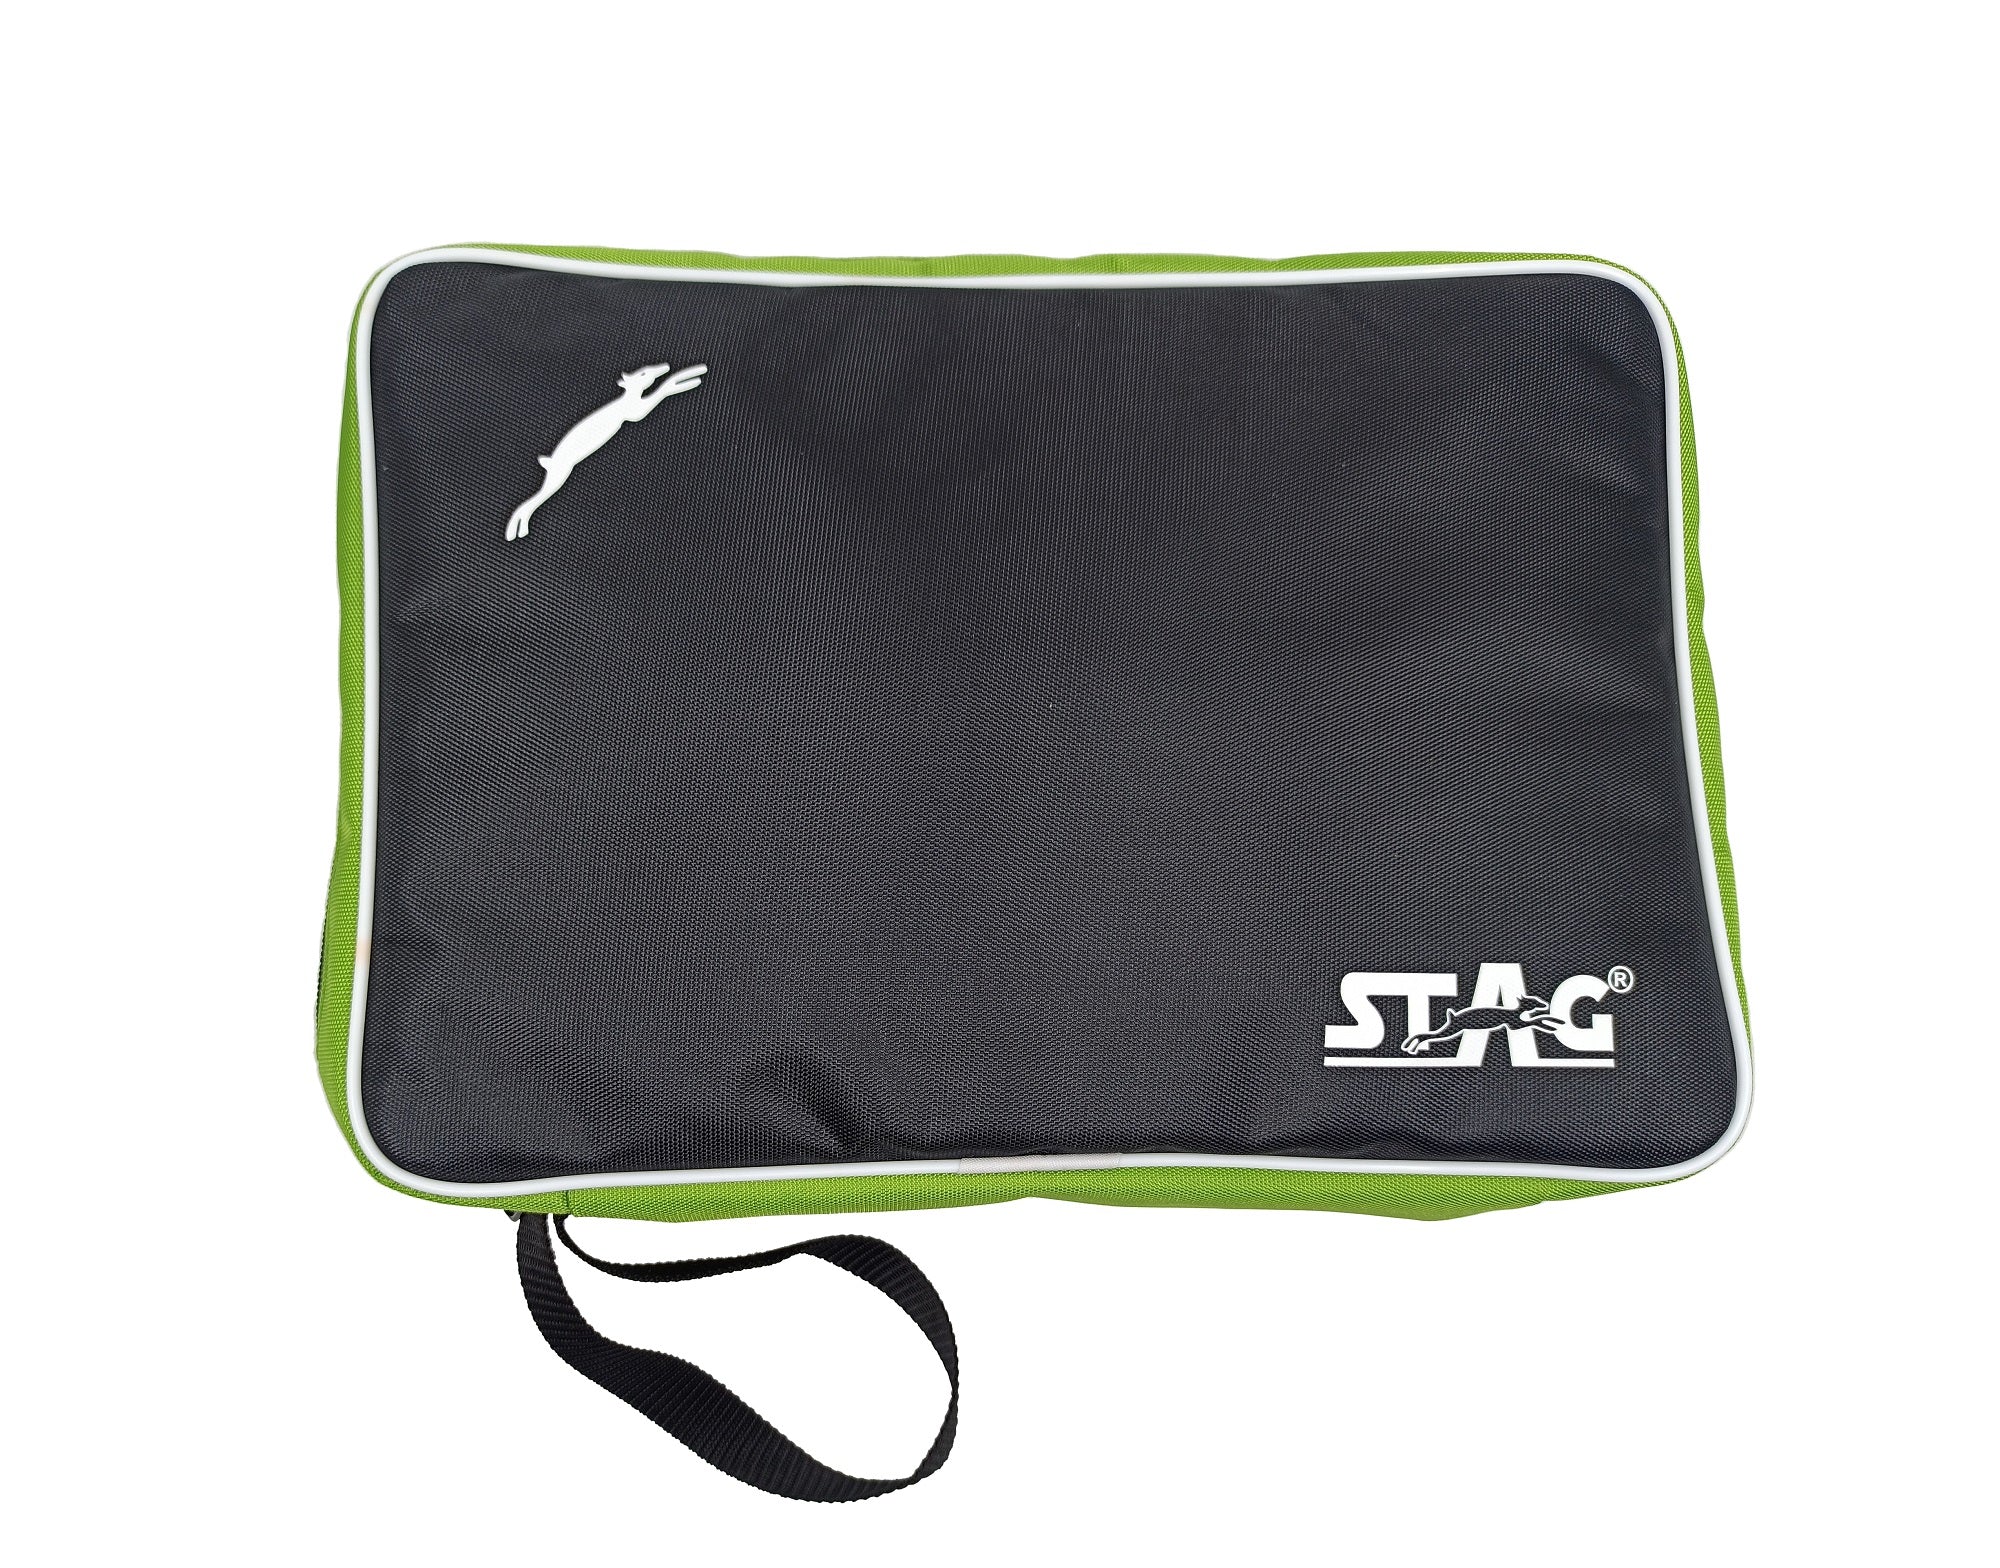 Stag DOUBLE CHAIN DELUXE RACKET CASE WITH POCKET FOR ACCESSORIES (ONLY CASE)